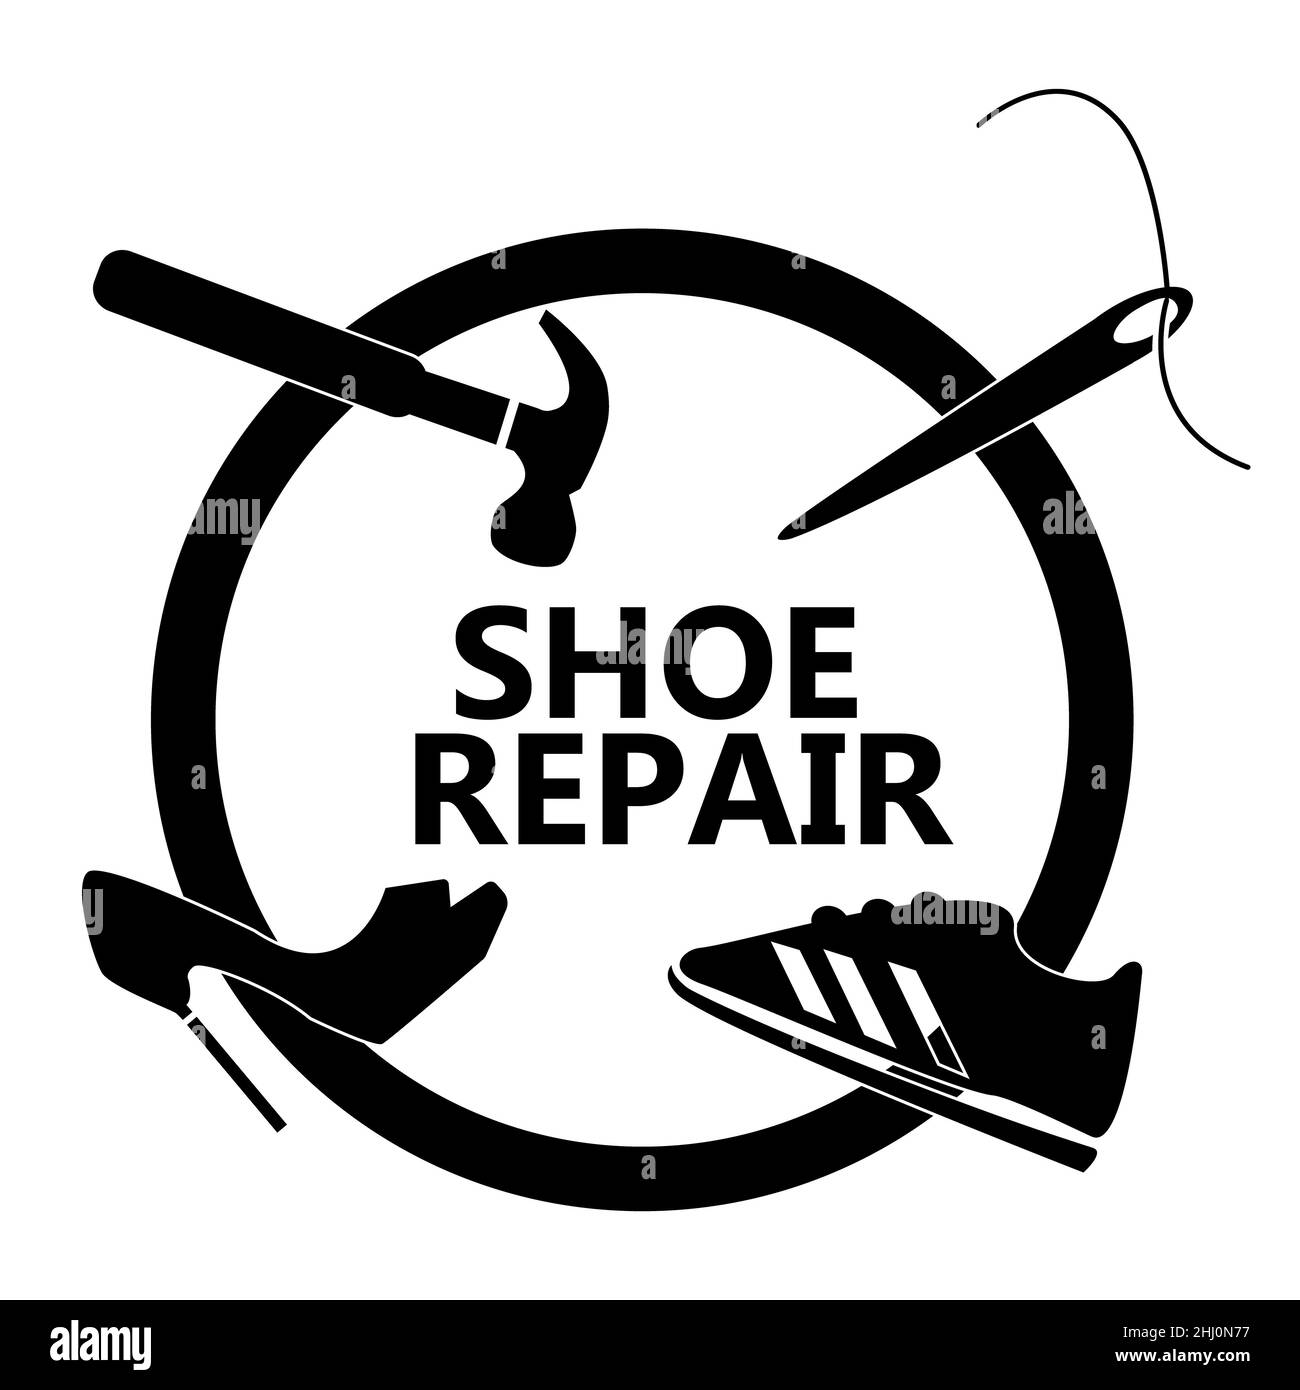 Shoe repair icon on white background. Shoe repair logo. shoemaker sign. flat style. Stock Photo